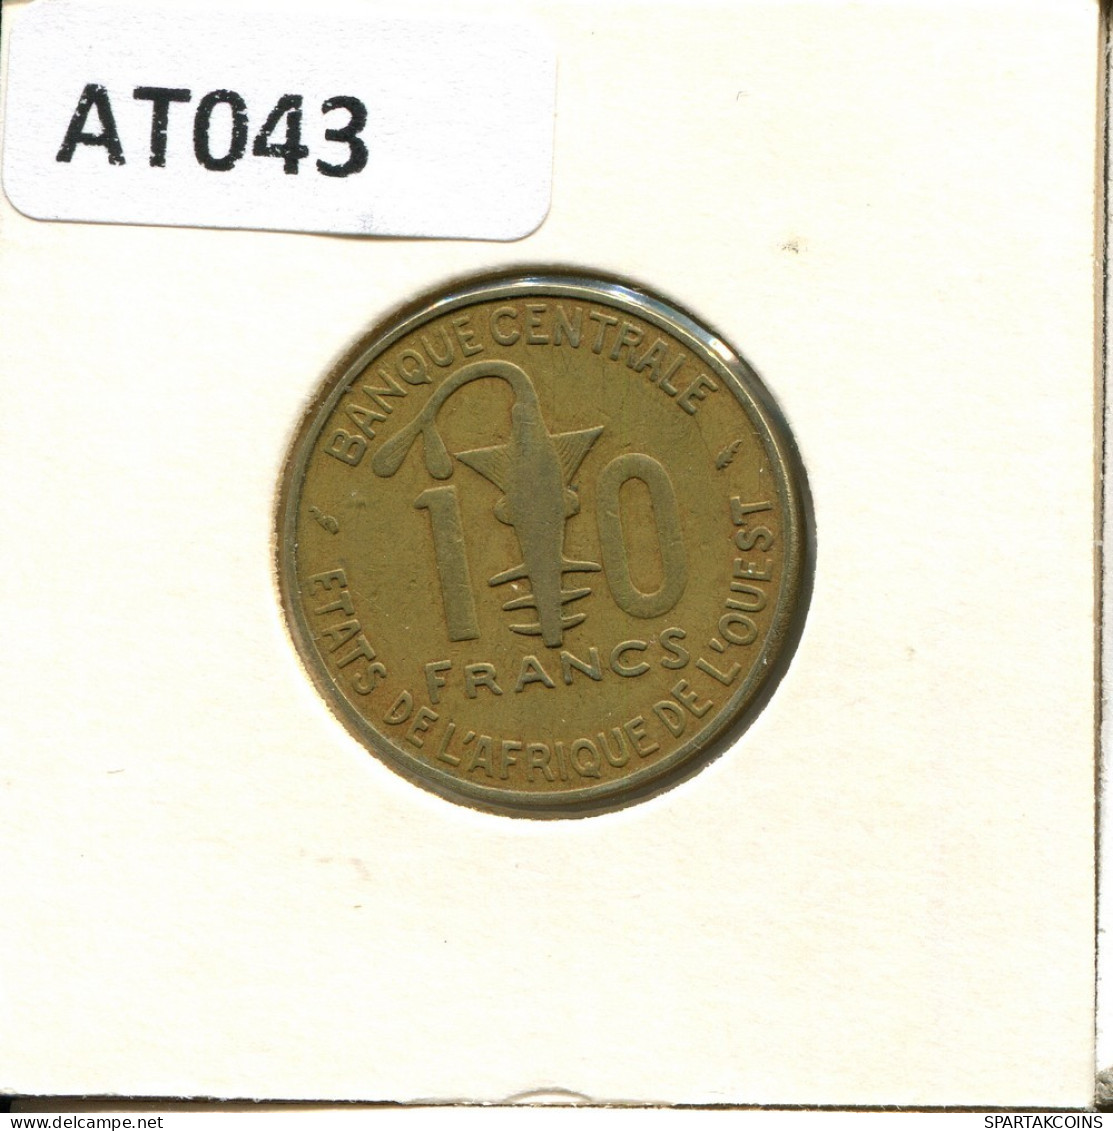 10 FRANCS CFA 1994 Western African States (BCEAO) Coin #AT043.U.A - Other - Africa